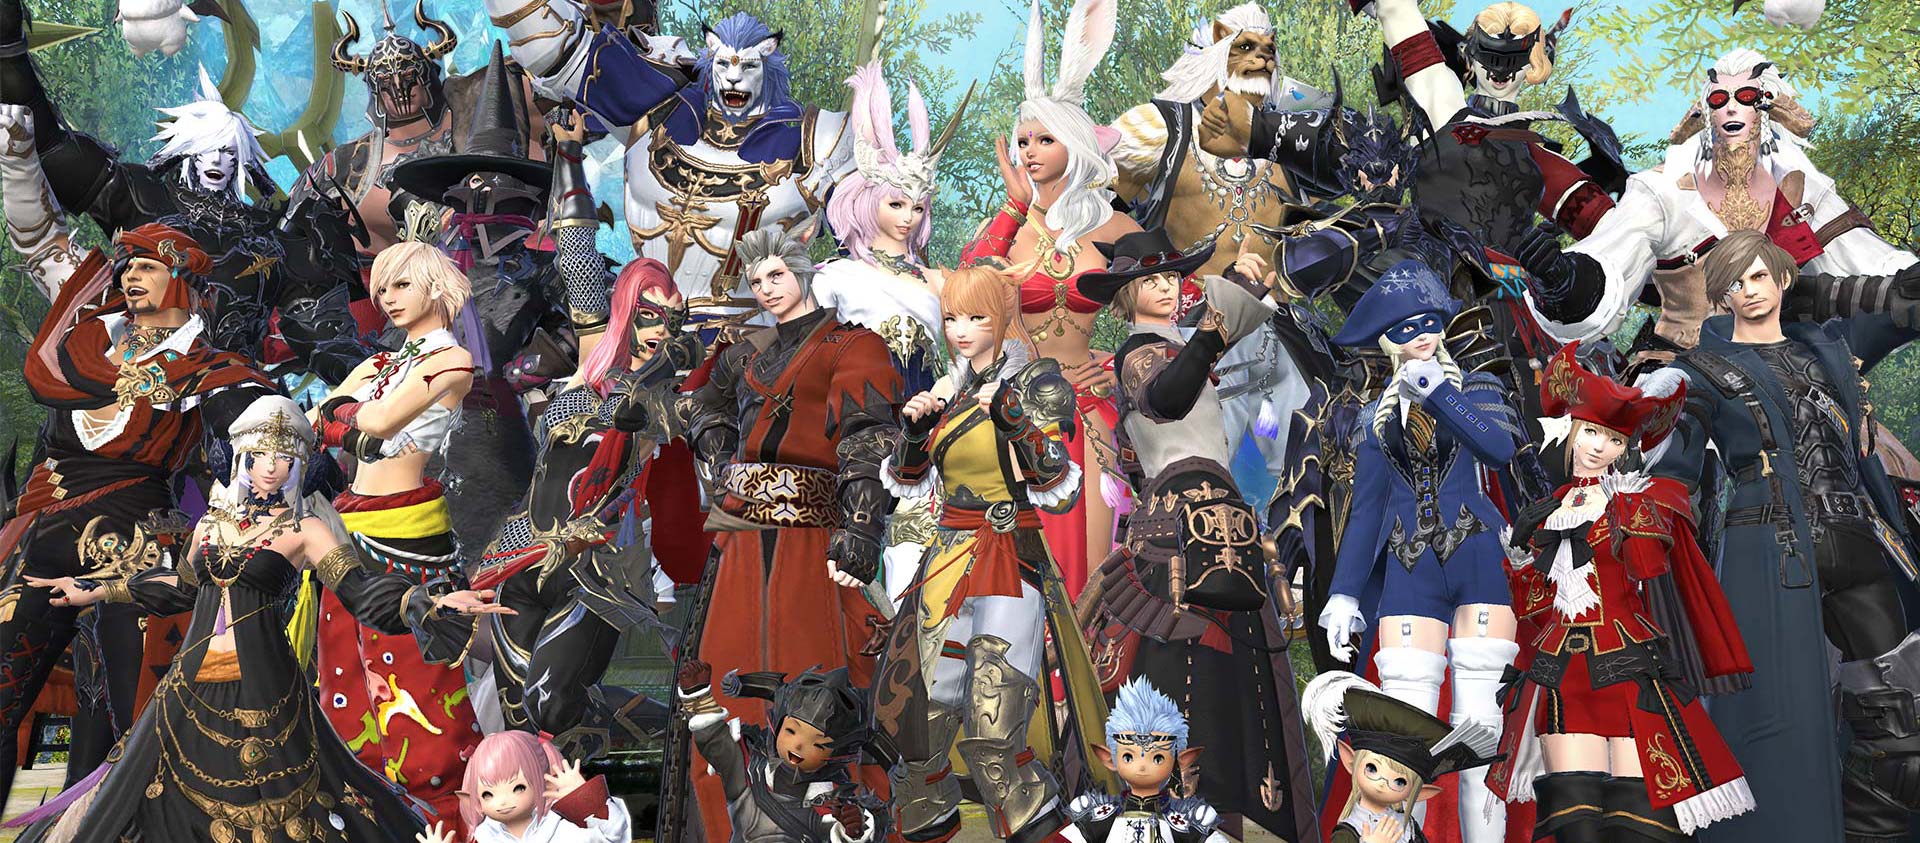 A group of customized characters posing together with joy on their faces.